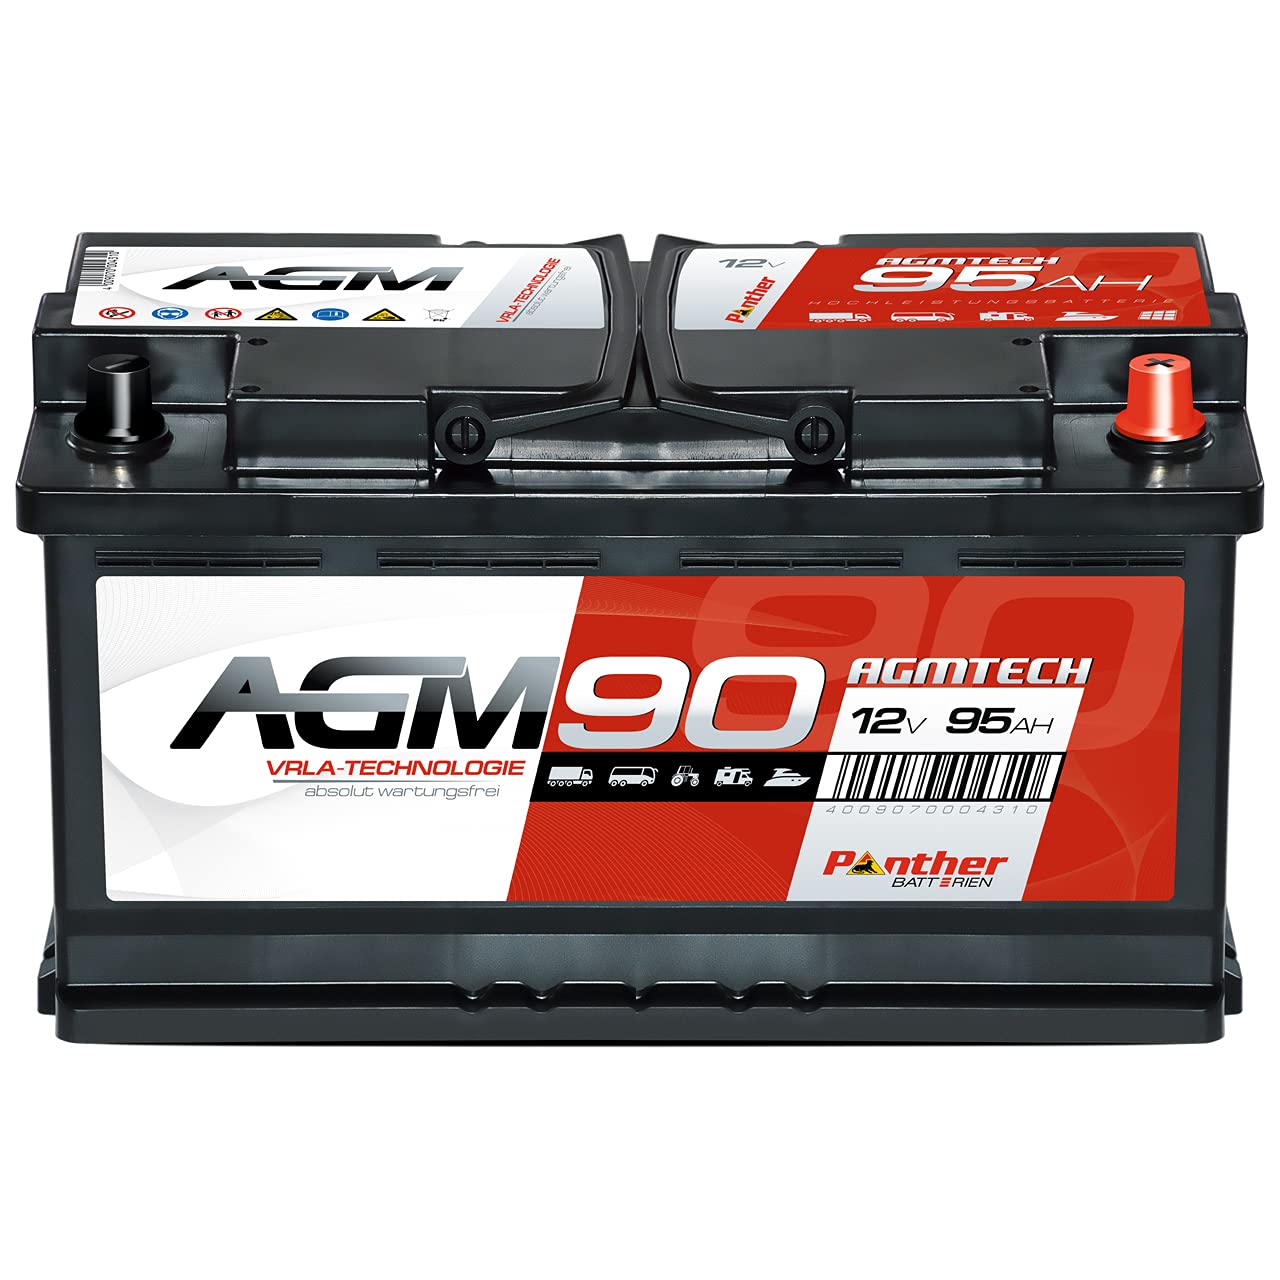 Panther Solarbatterie AGM90 12V 90Ah 900A Auto Versorgung Boot Reha Batterie von Panther